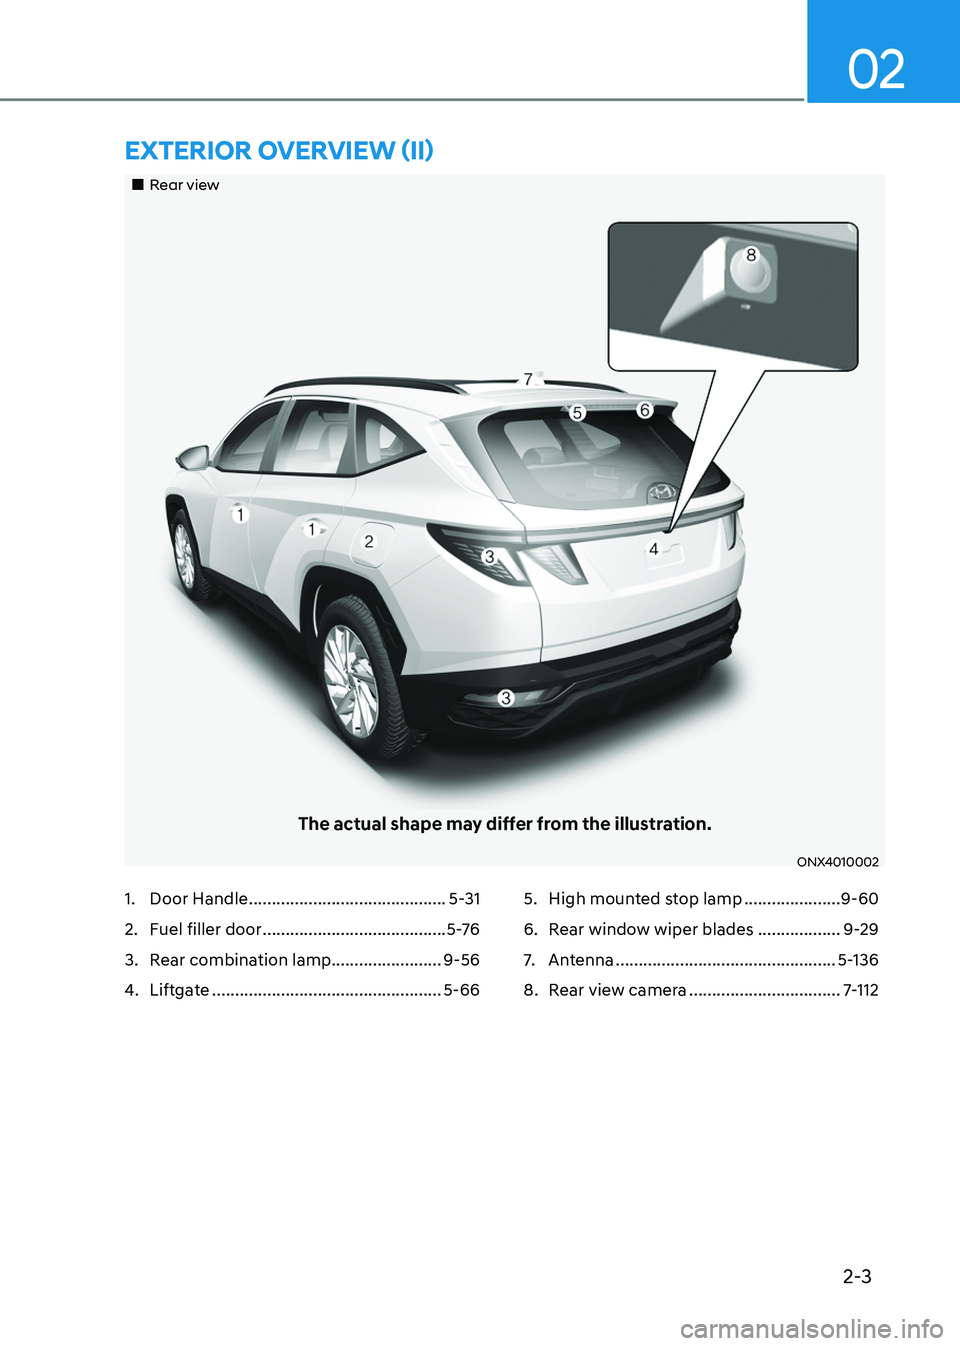 HYUNDAI TUCSON 2022 User Guide 2-3
02
„„Rear view
The actual shape may differ from the illustration.
ONX4010002
EXTERIOR OVERVIEW (II)
1. Door Handle ...........................................5-31
2. Fuel filler door ...